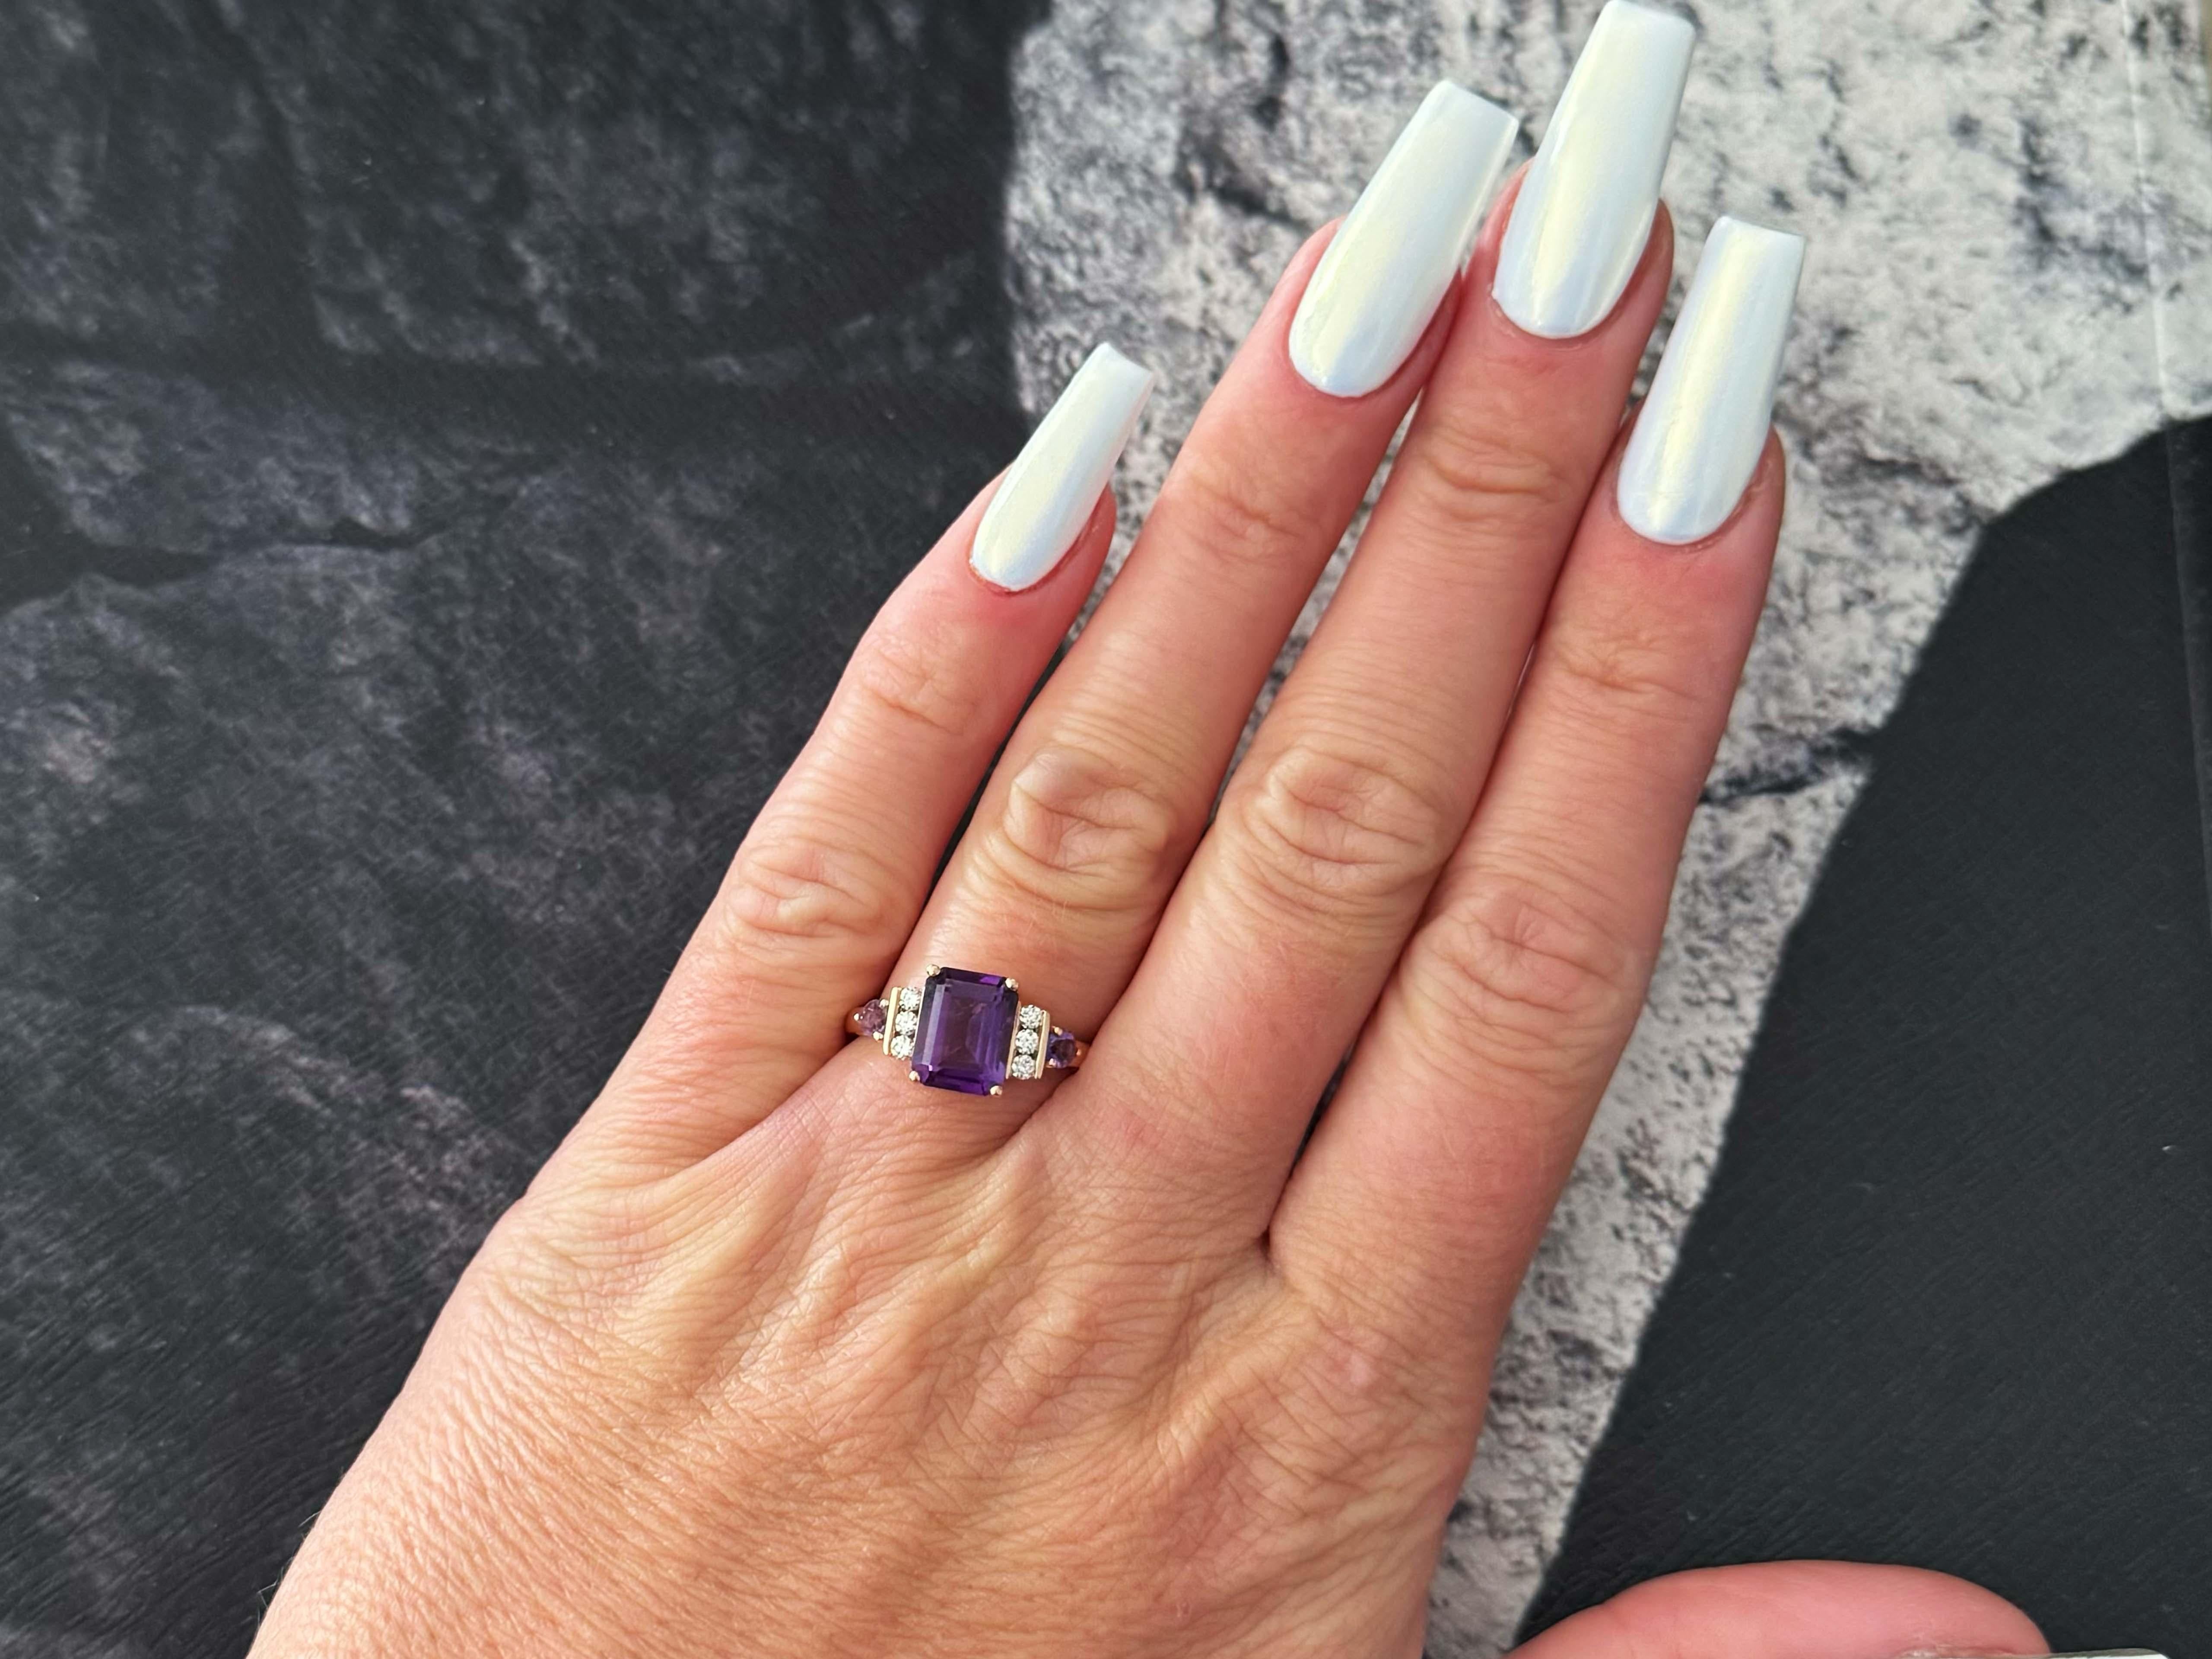 Ring Specifications:
​
​Designer: EFFY

Metal: 14k Rose Gold

Total Weight: 3.4 Grams

Diamond Count: 6

Diamond Clarity: SI

Diamond Color: G

Diamond Carat Weight: 0.12 carats

Gemstone: 1 emerald cut amethyst and 2 round amethyst
​
​Emerald Cut